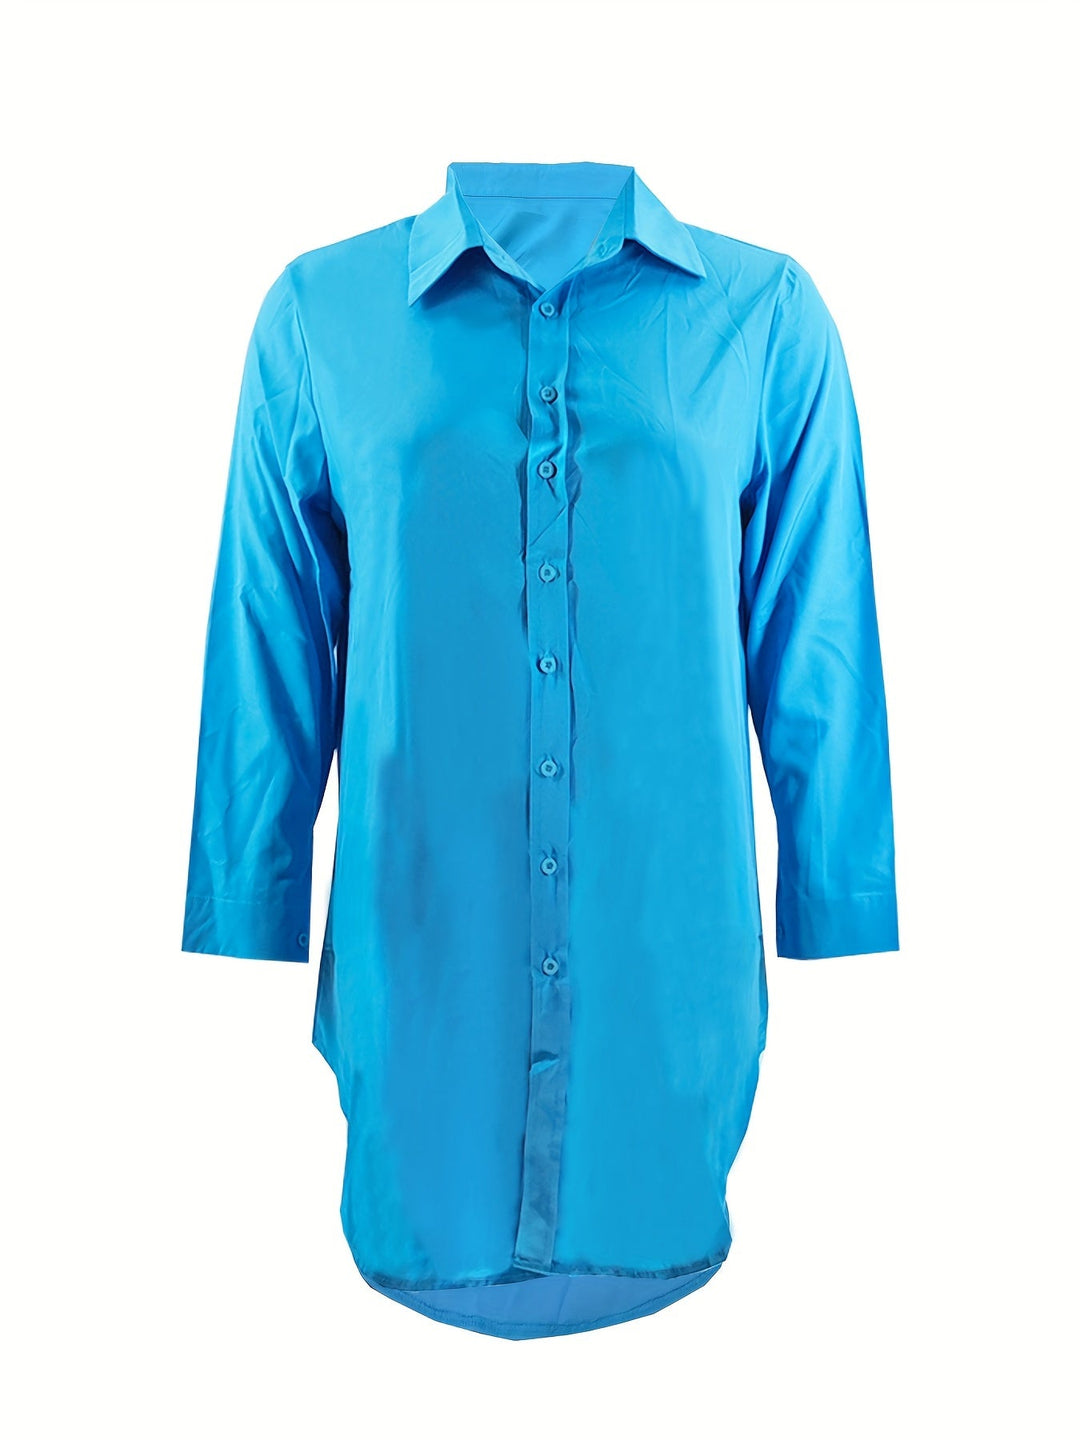 Elegant Cozy Long Sleeve Button Up Collared Shirt Dresses - Gen U Us Products